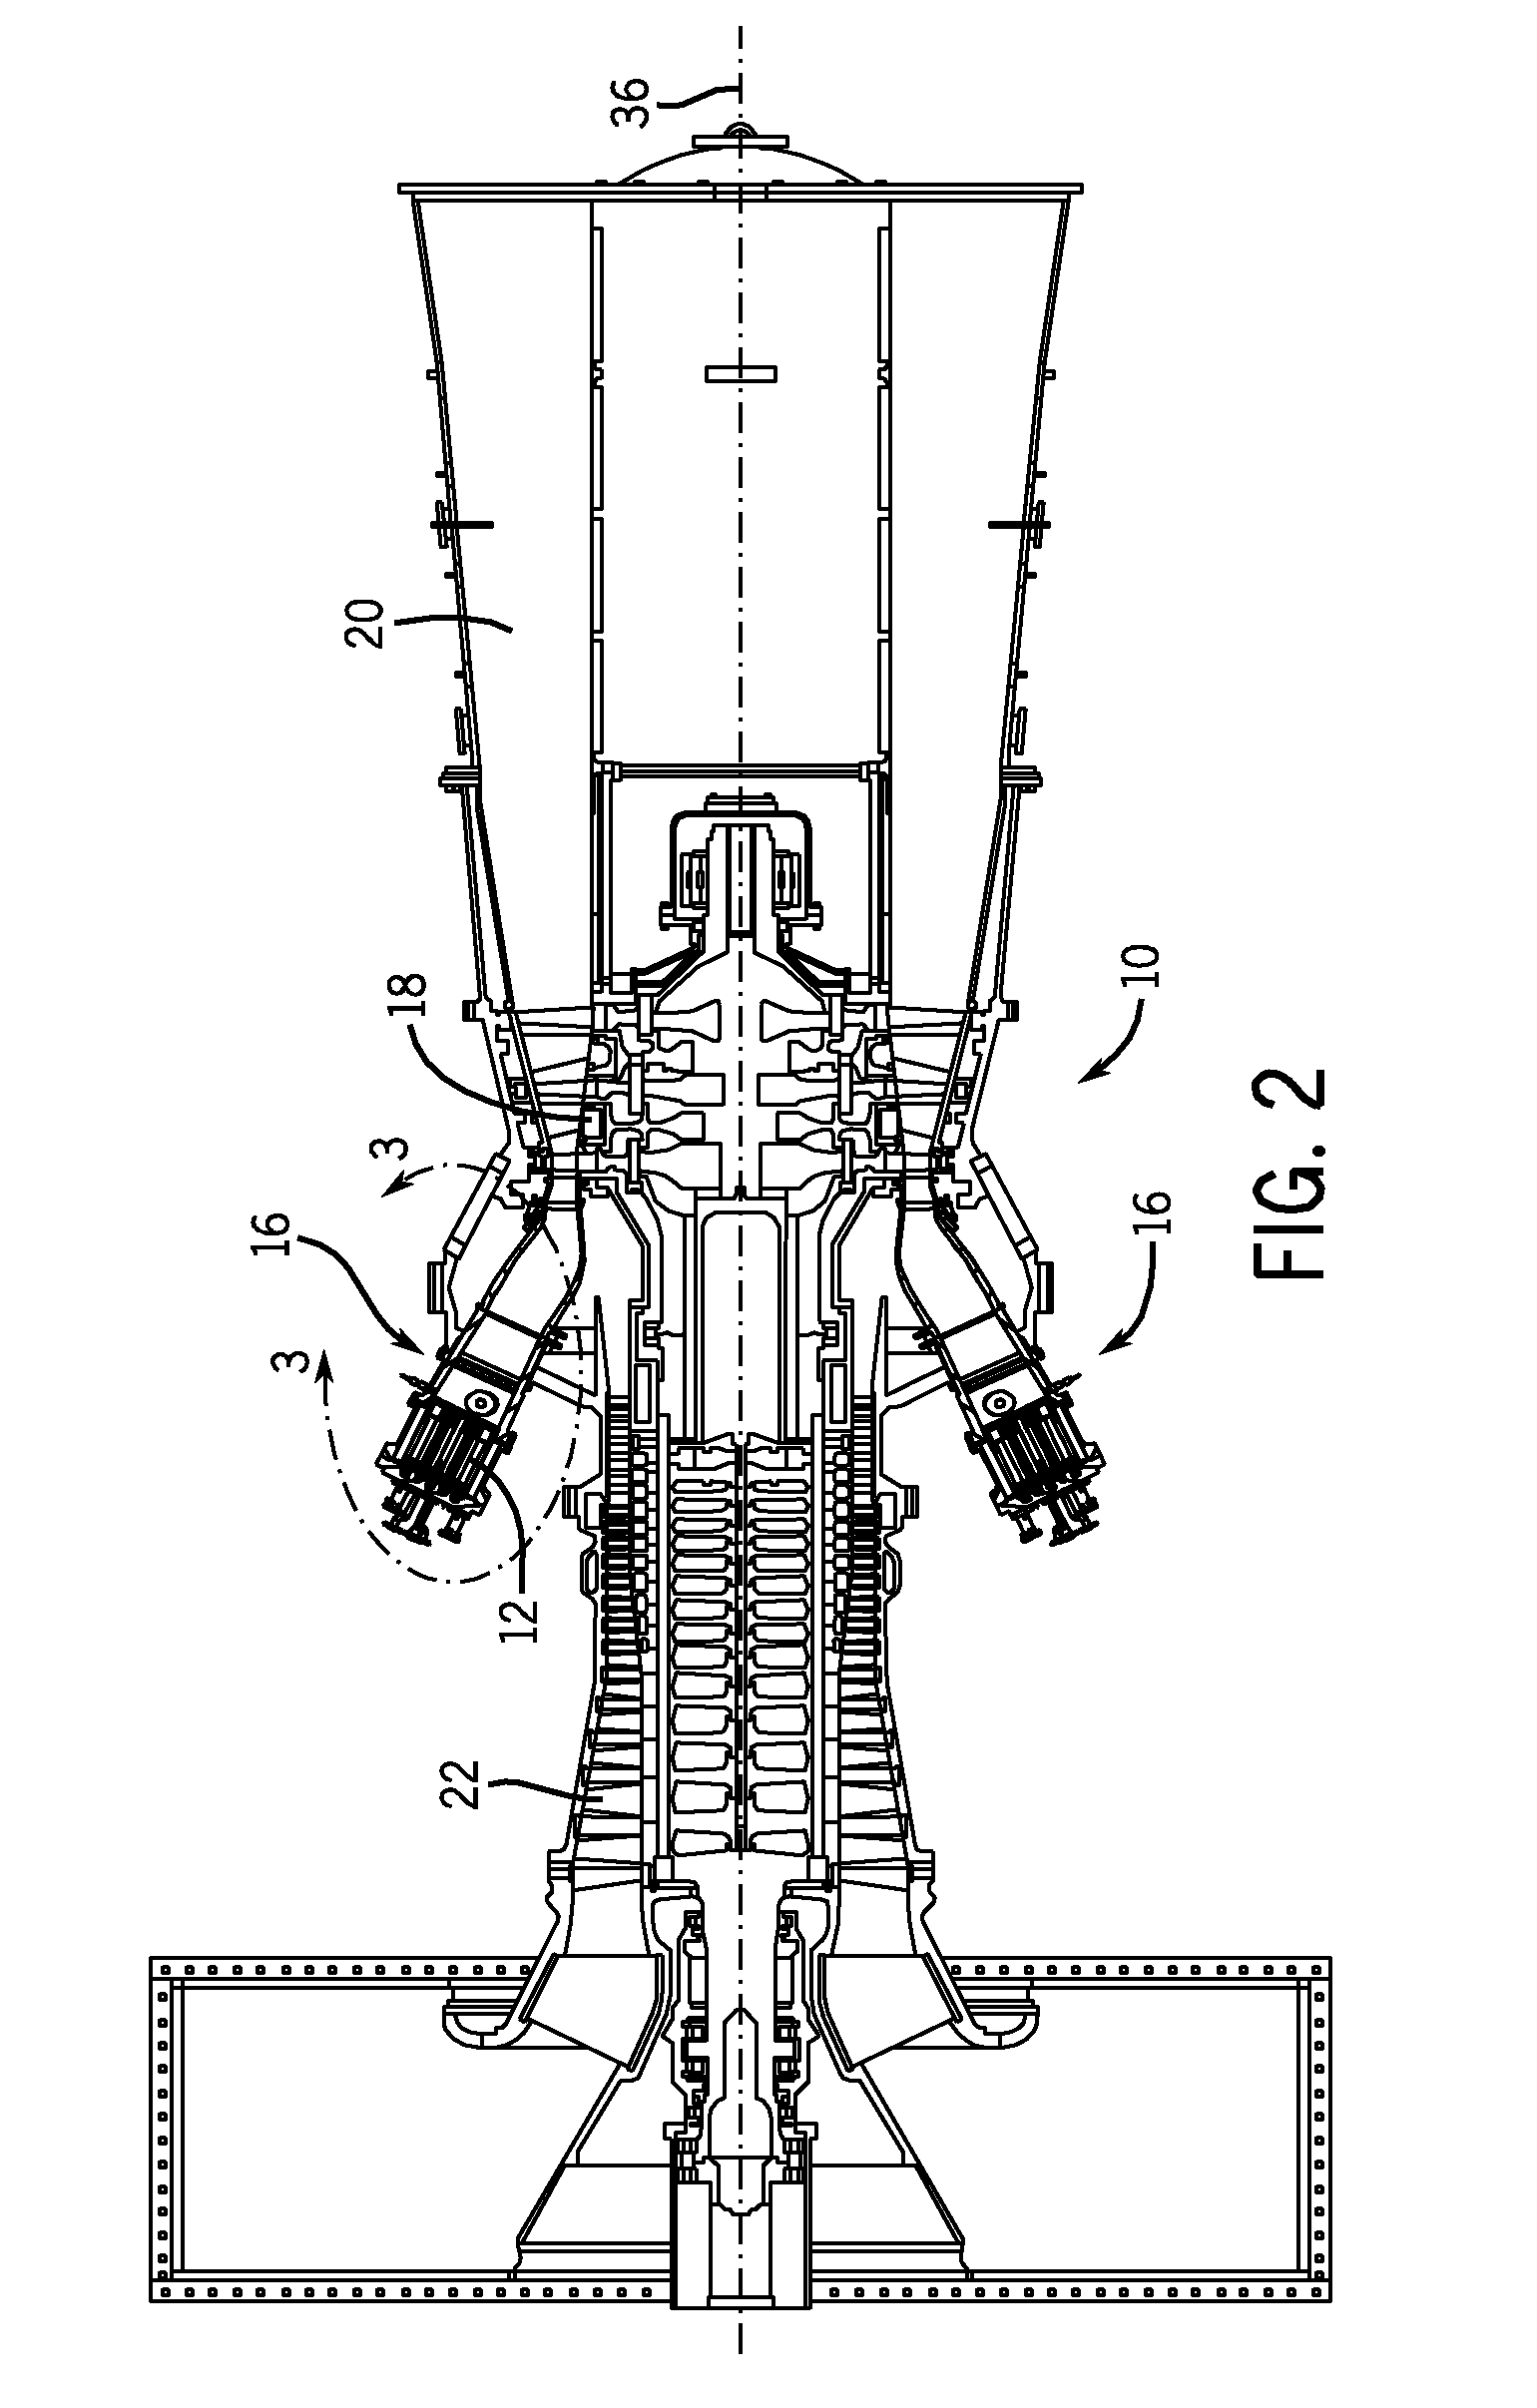 Premixing apparatus for fuel injection in a turbine engine